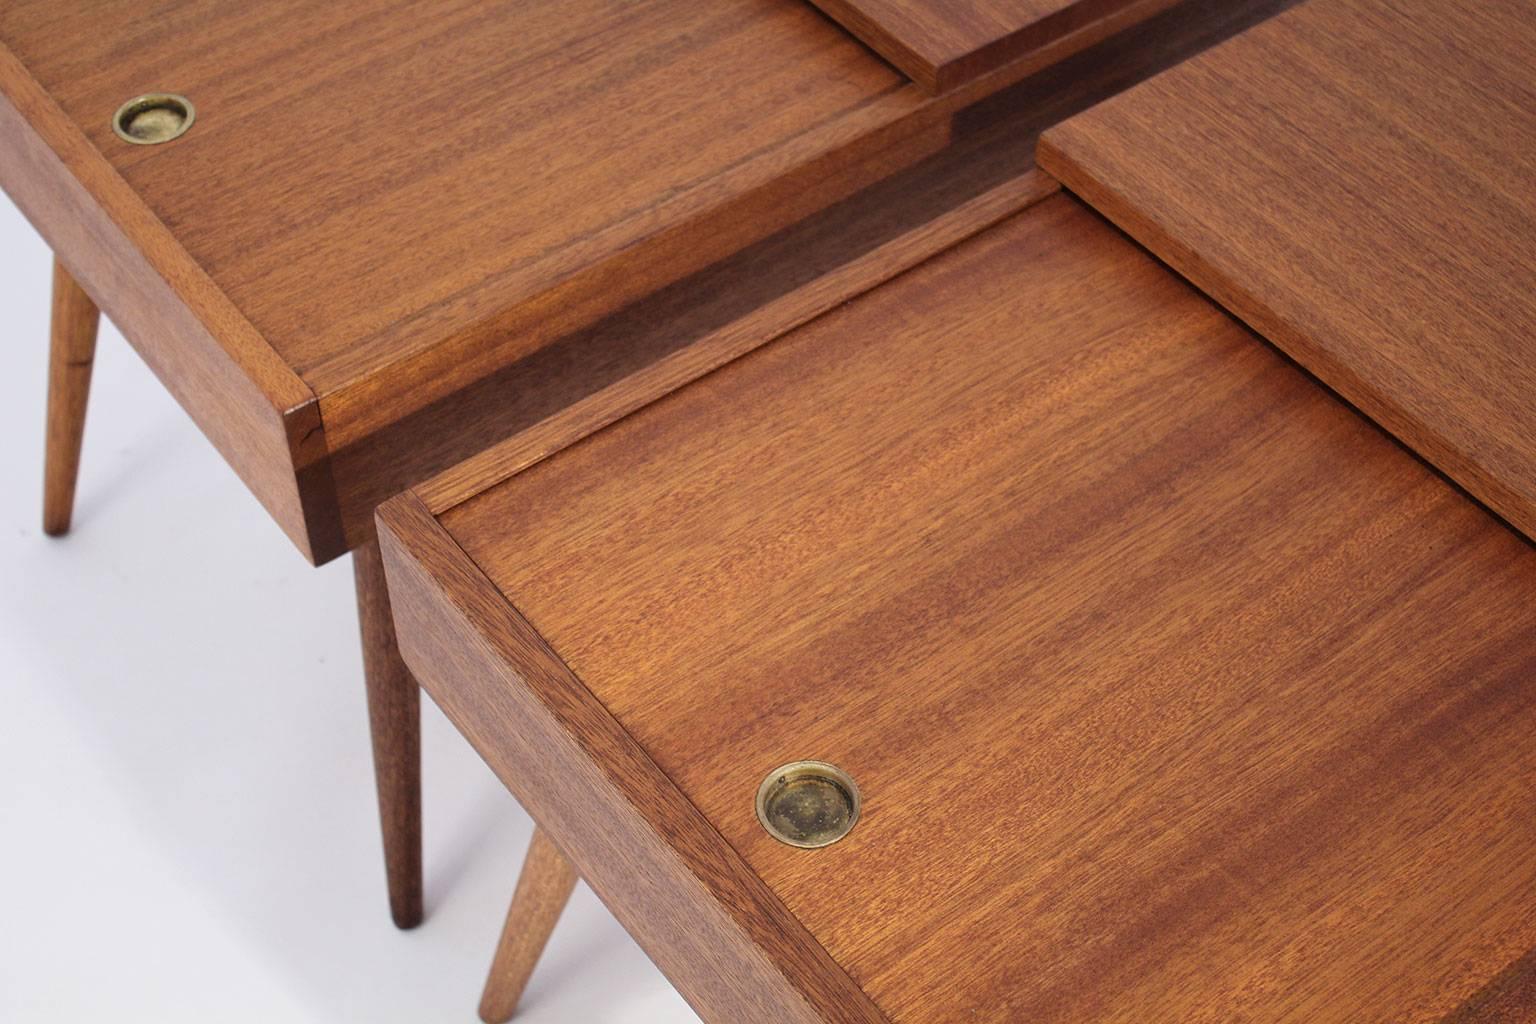 Brown Saltman End Tables by John Keal In Excellent Condition For Sale In San Diego, CA